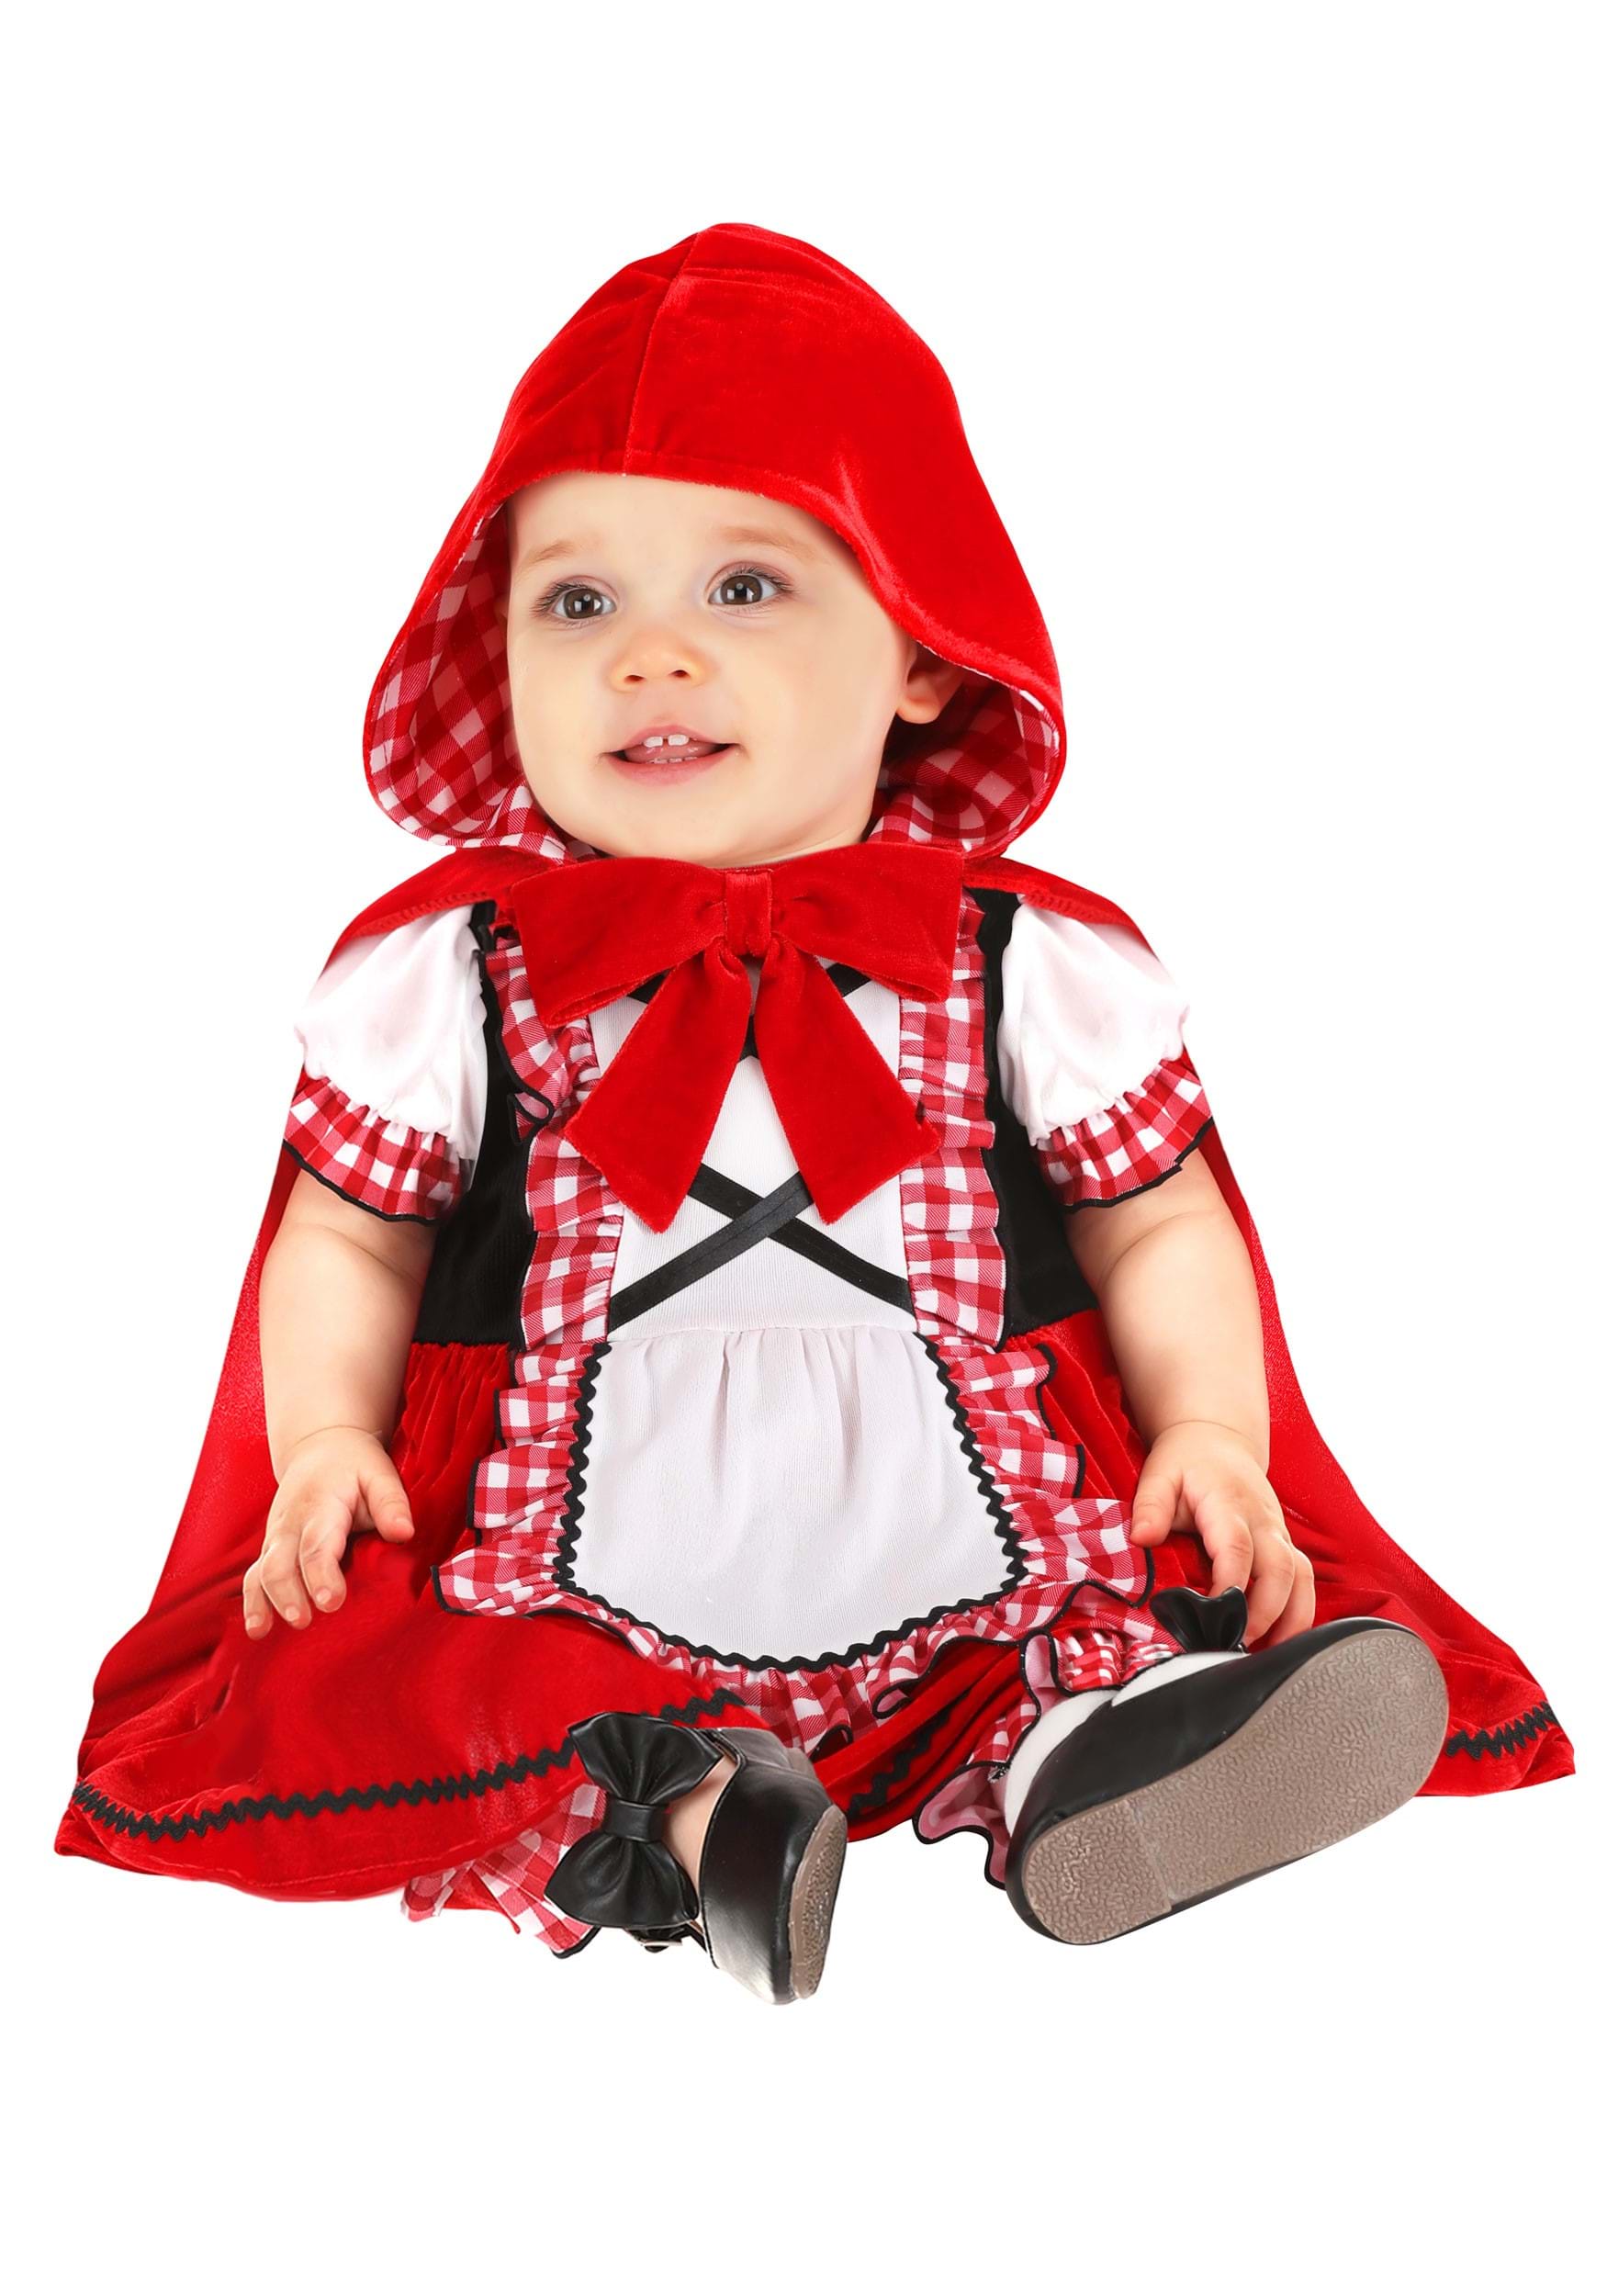 Infant's Classic Red Riding Hood Costume